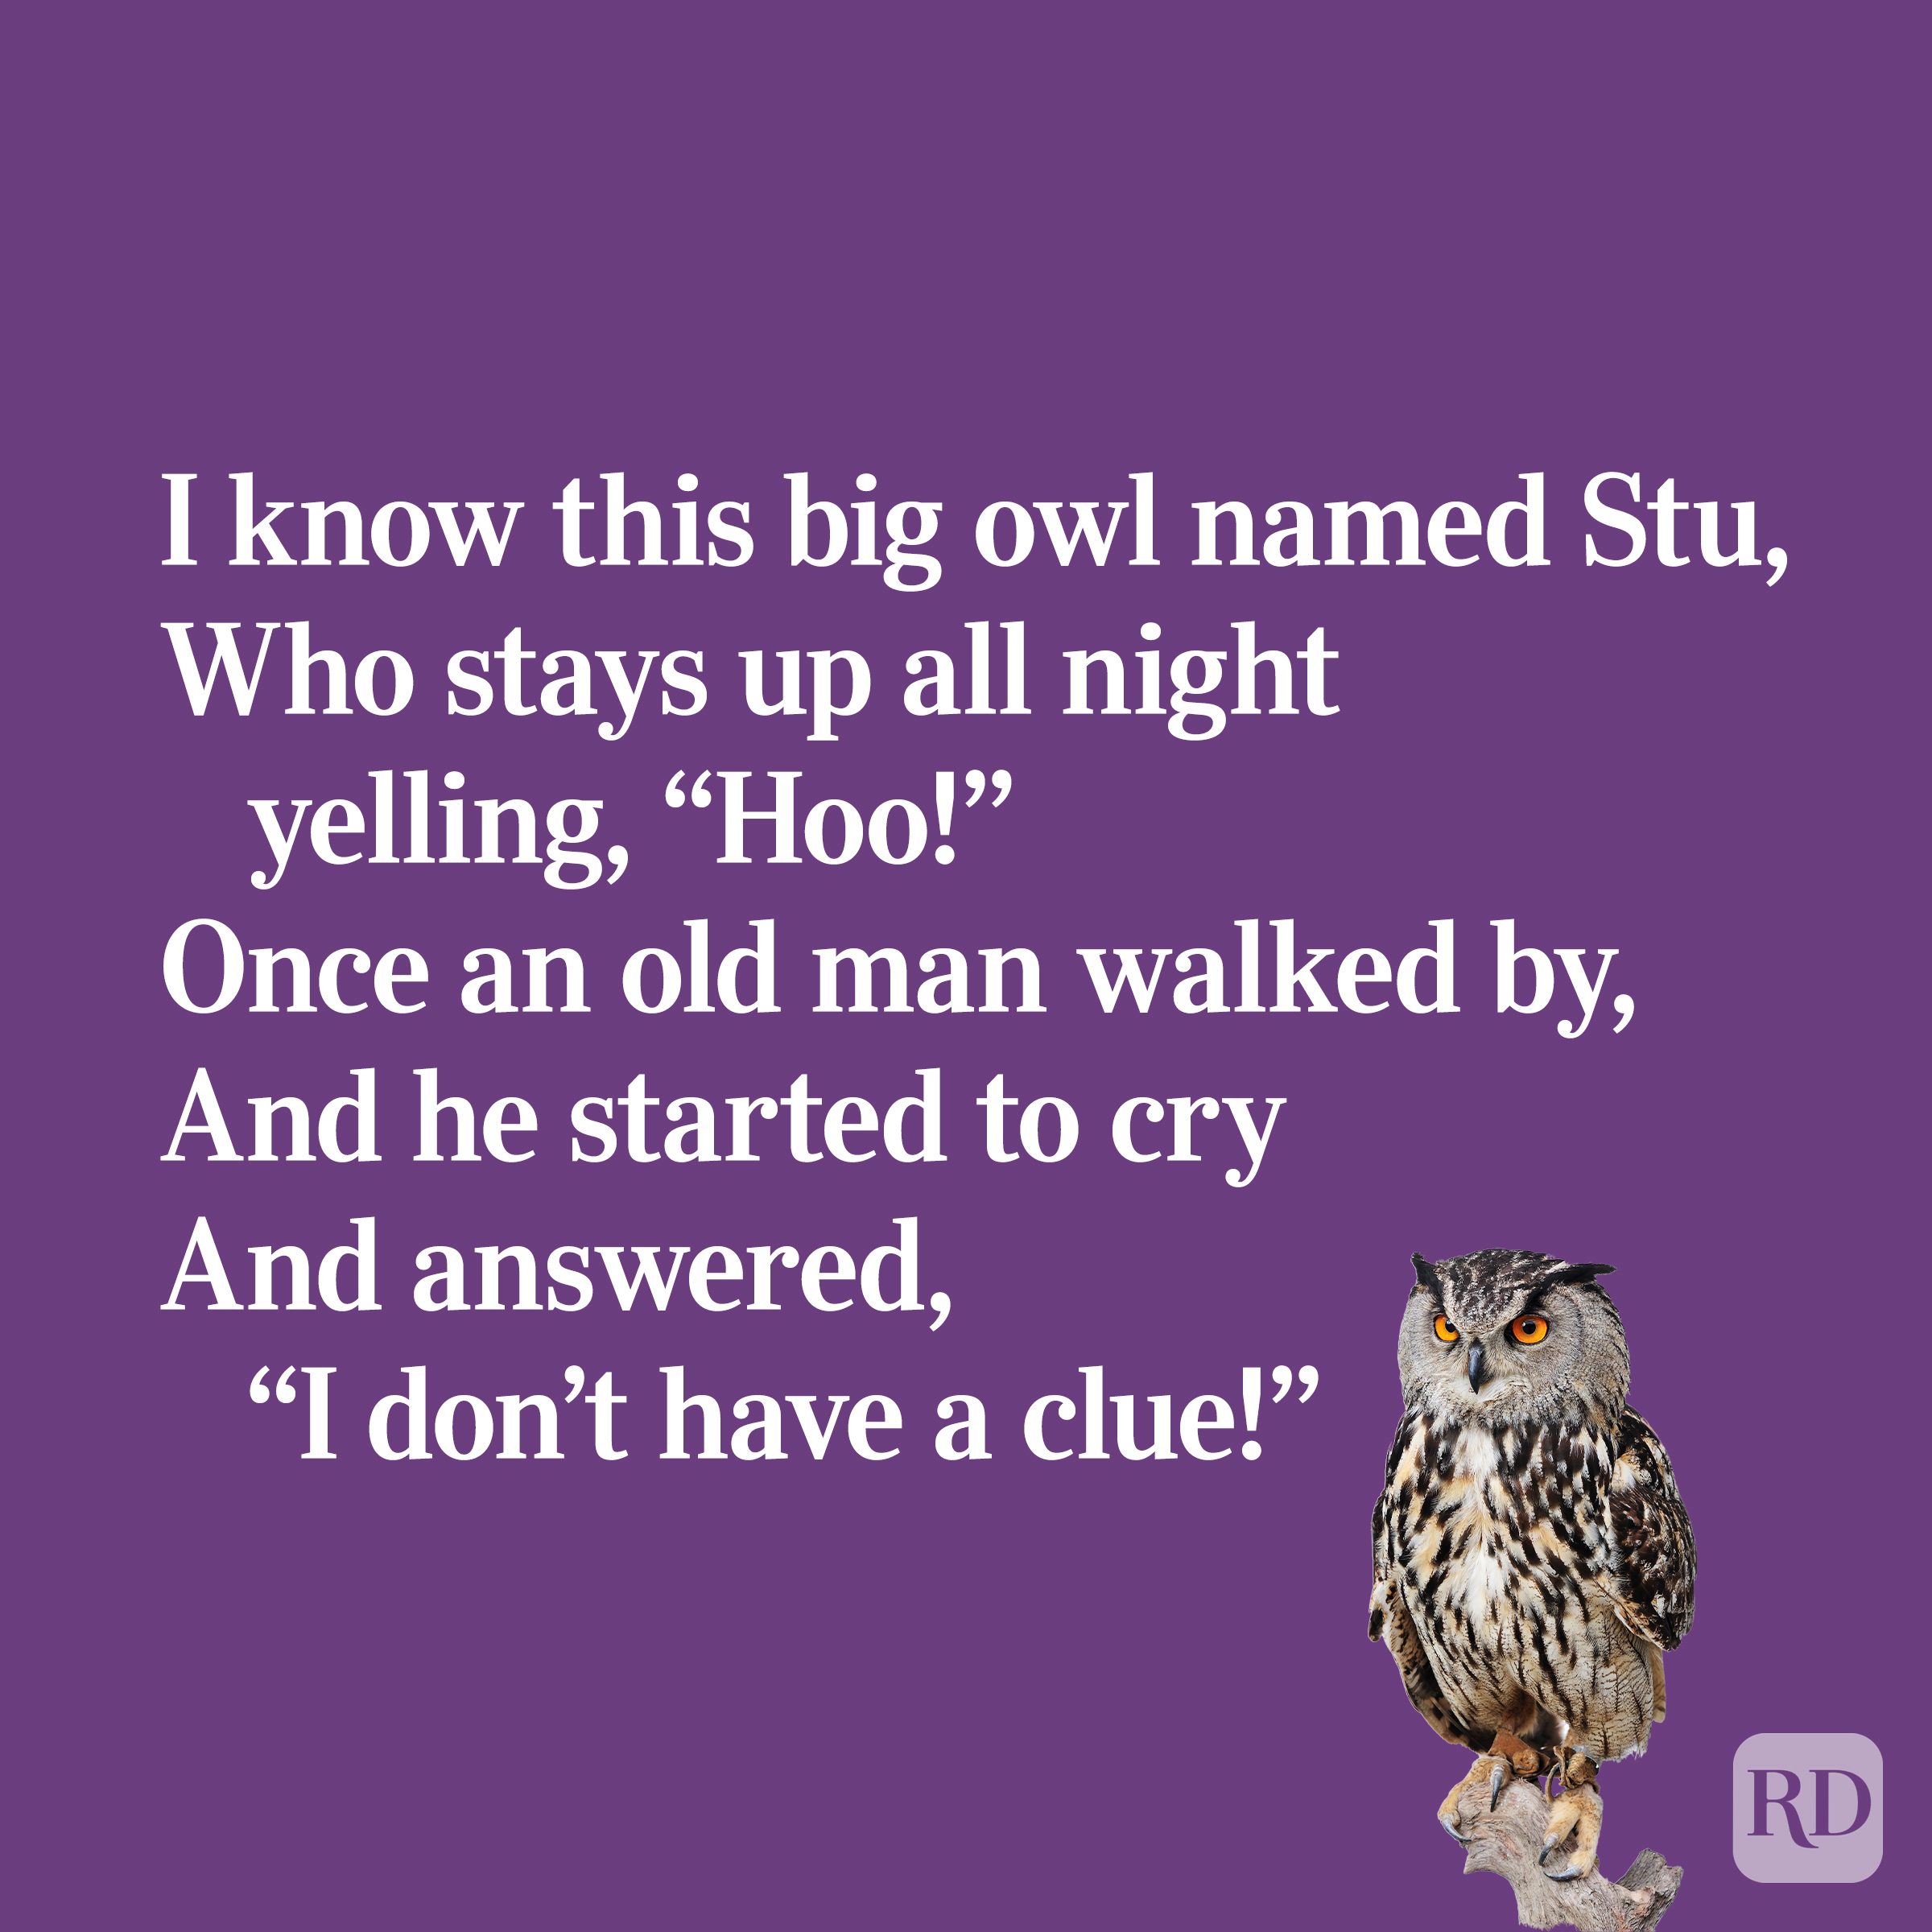 Quirky limerick about an owl